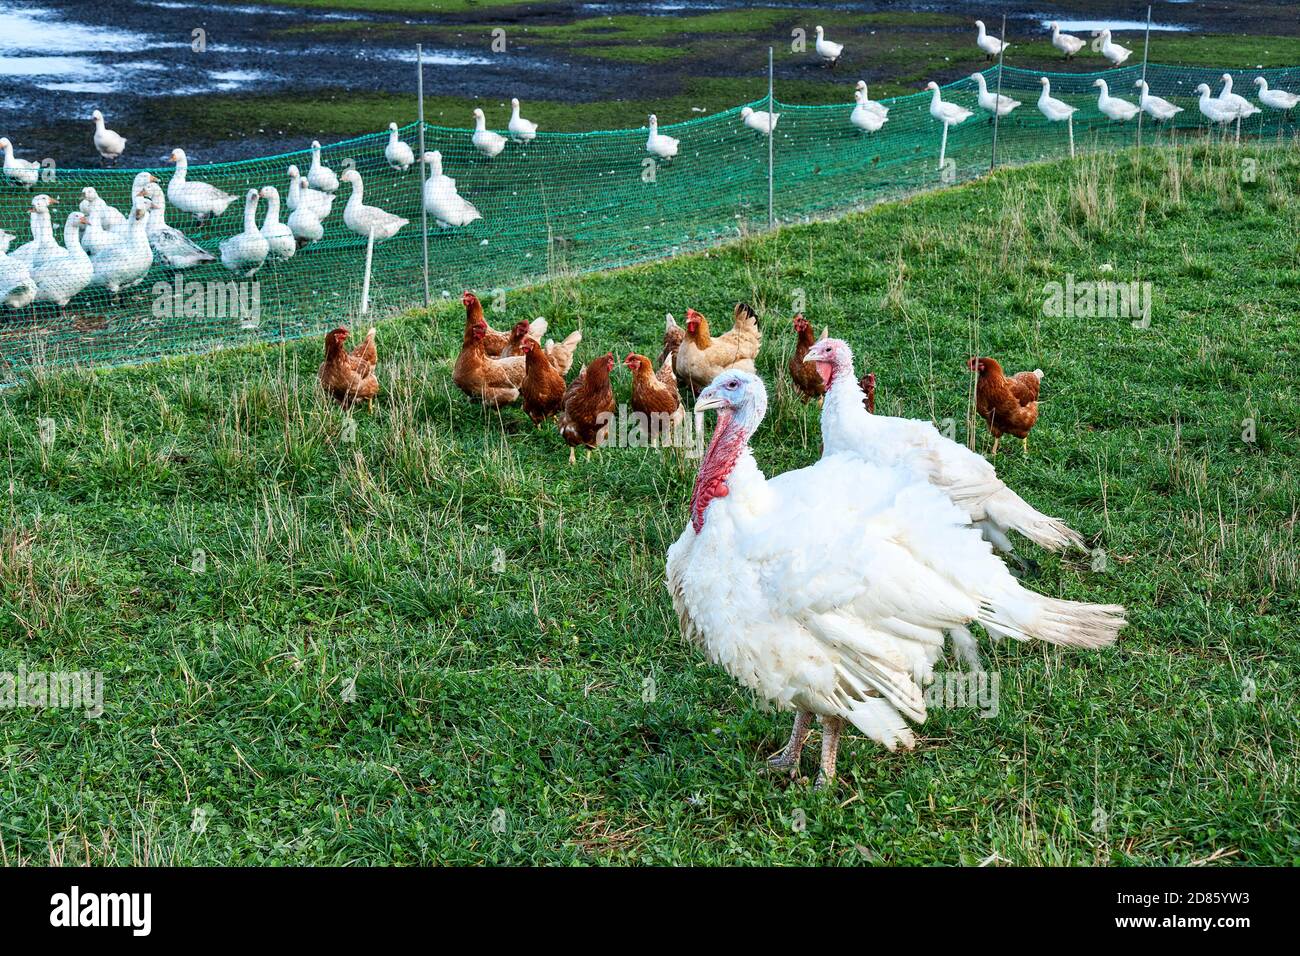 Turkeys, chickens and ducks in a field Stock Photo